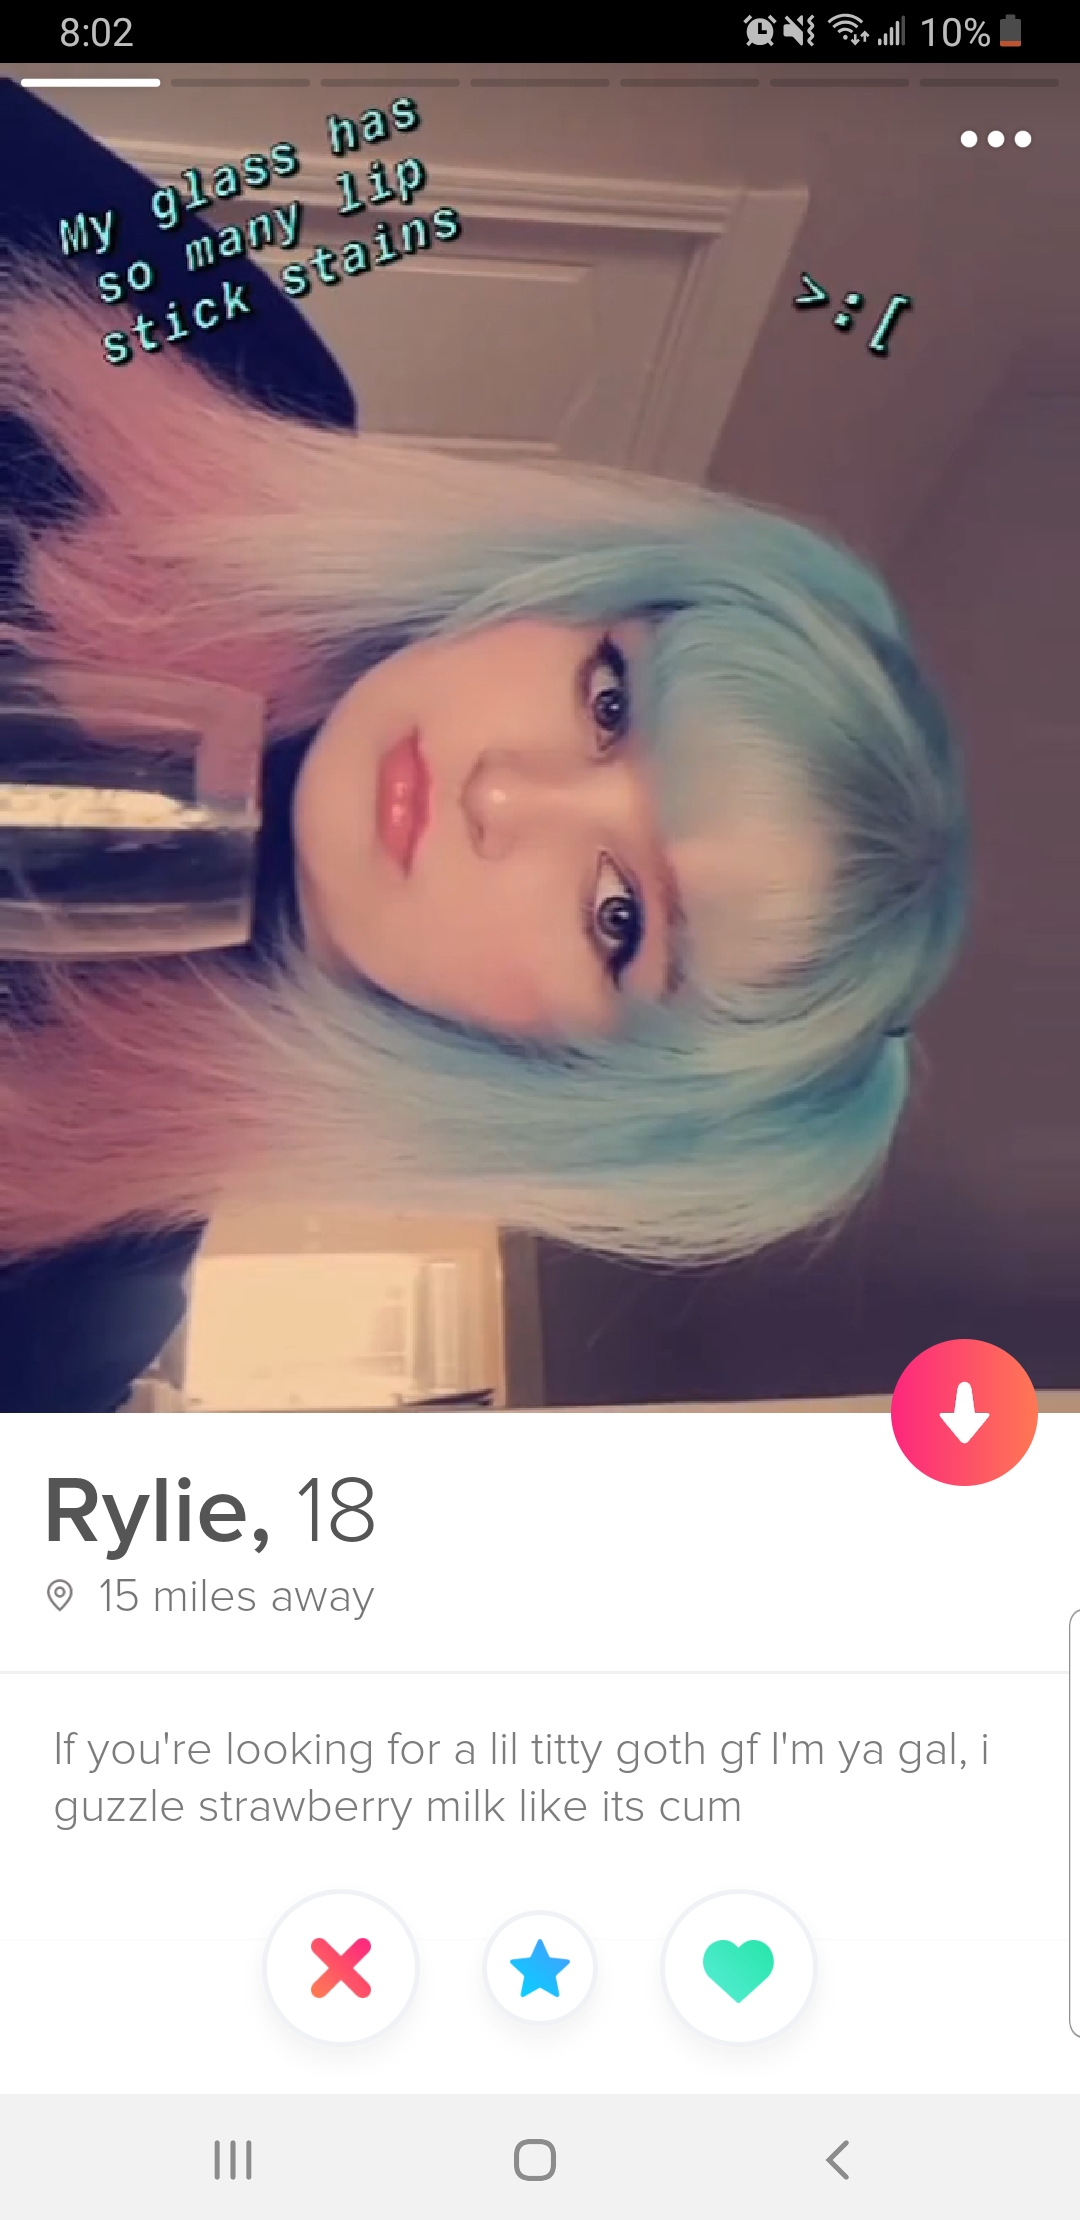 Hilariously Shameless Tinder profile that has My gloss vias So many 12p stick stans Rylie, 18 15 miles away If you're looking for all titty goth gt I'm ya gali guzzle strawberry milk its cum